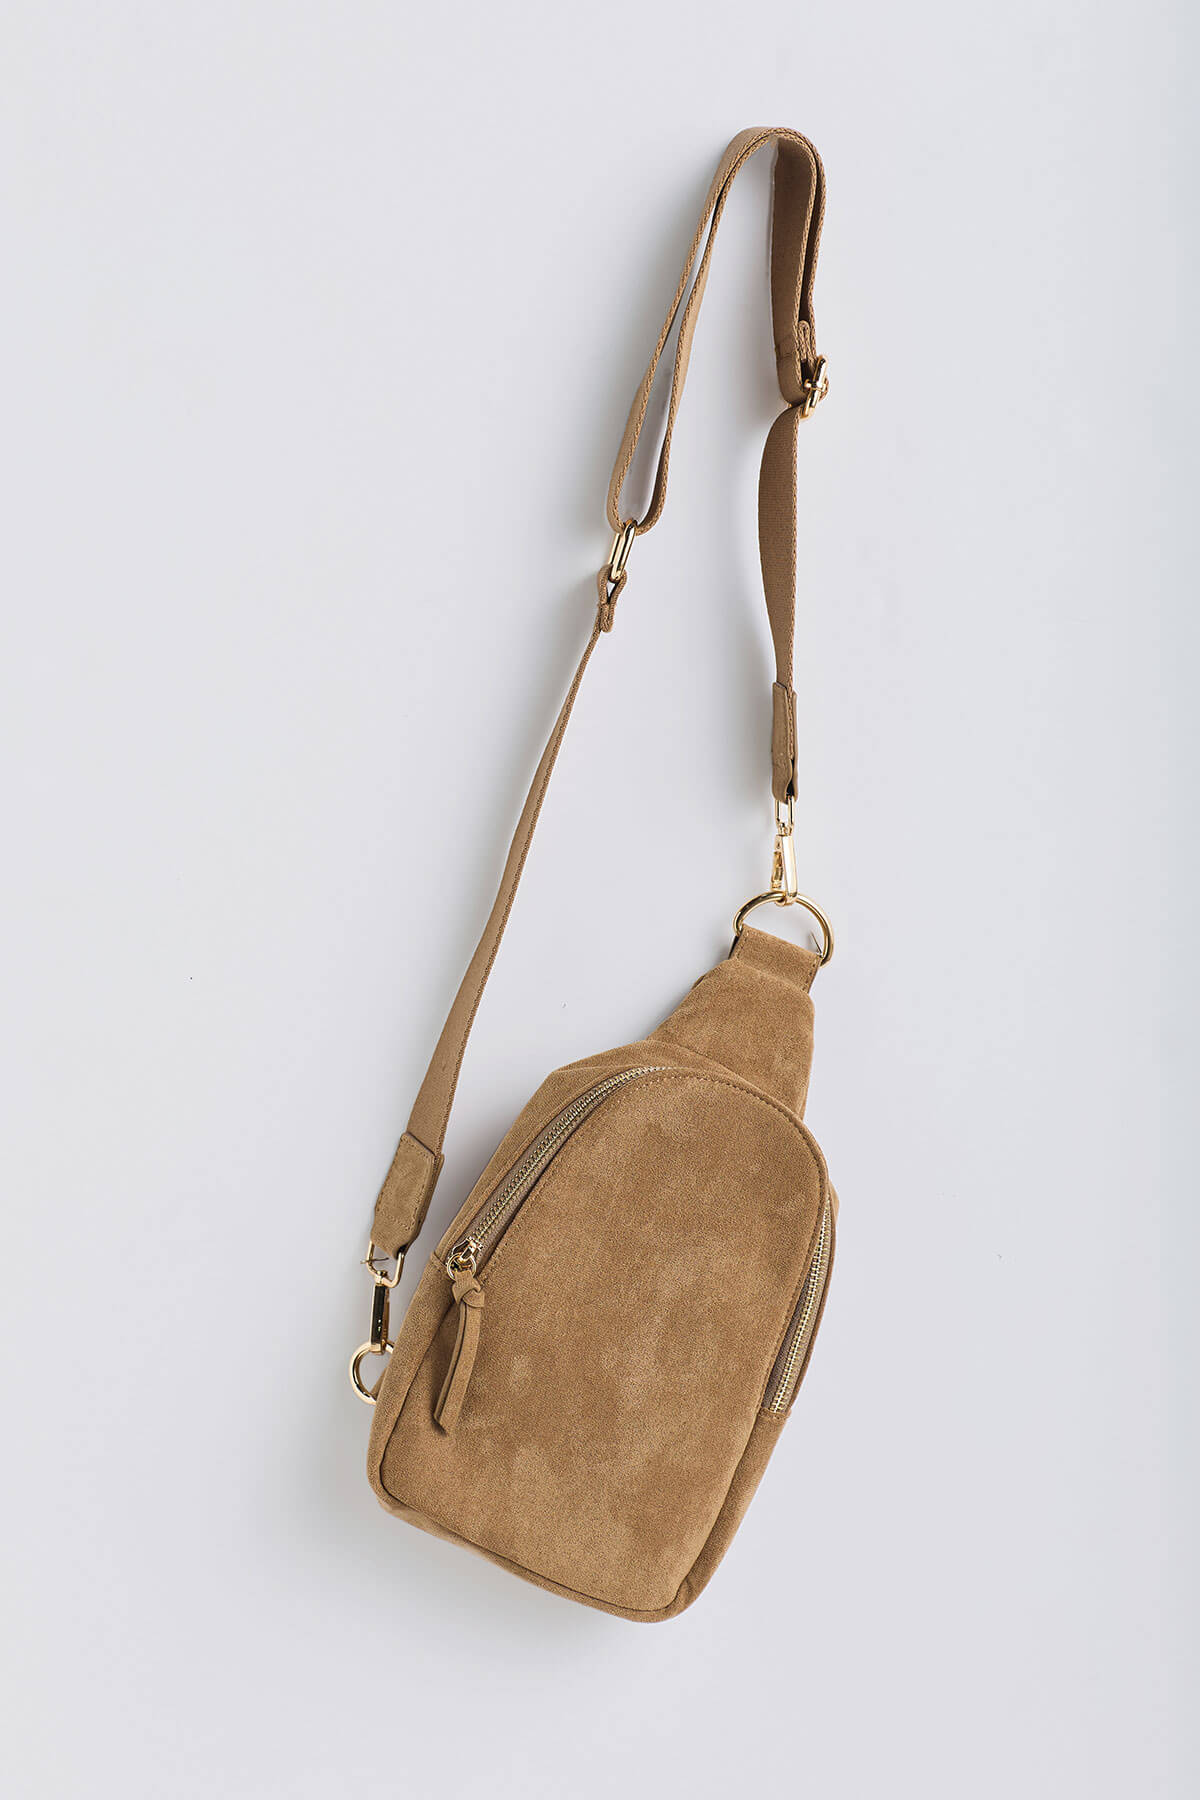 Social Threads Faux Suede Sling Bag | Mushroom | Size One Size